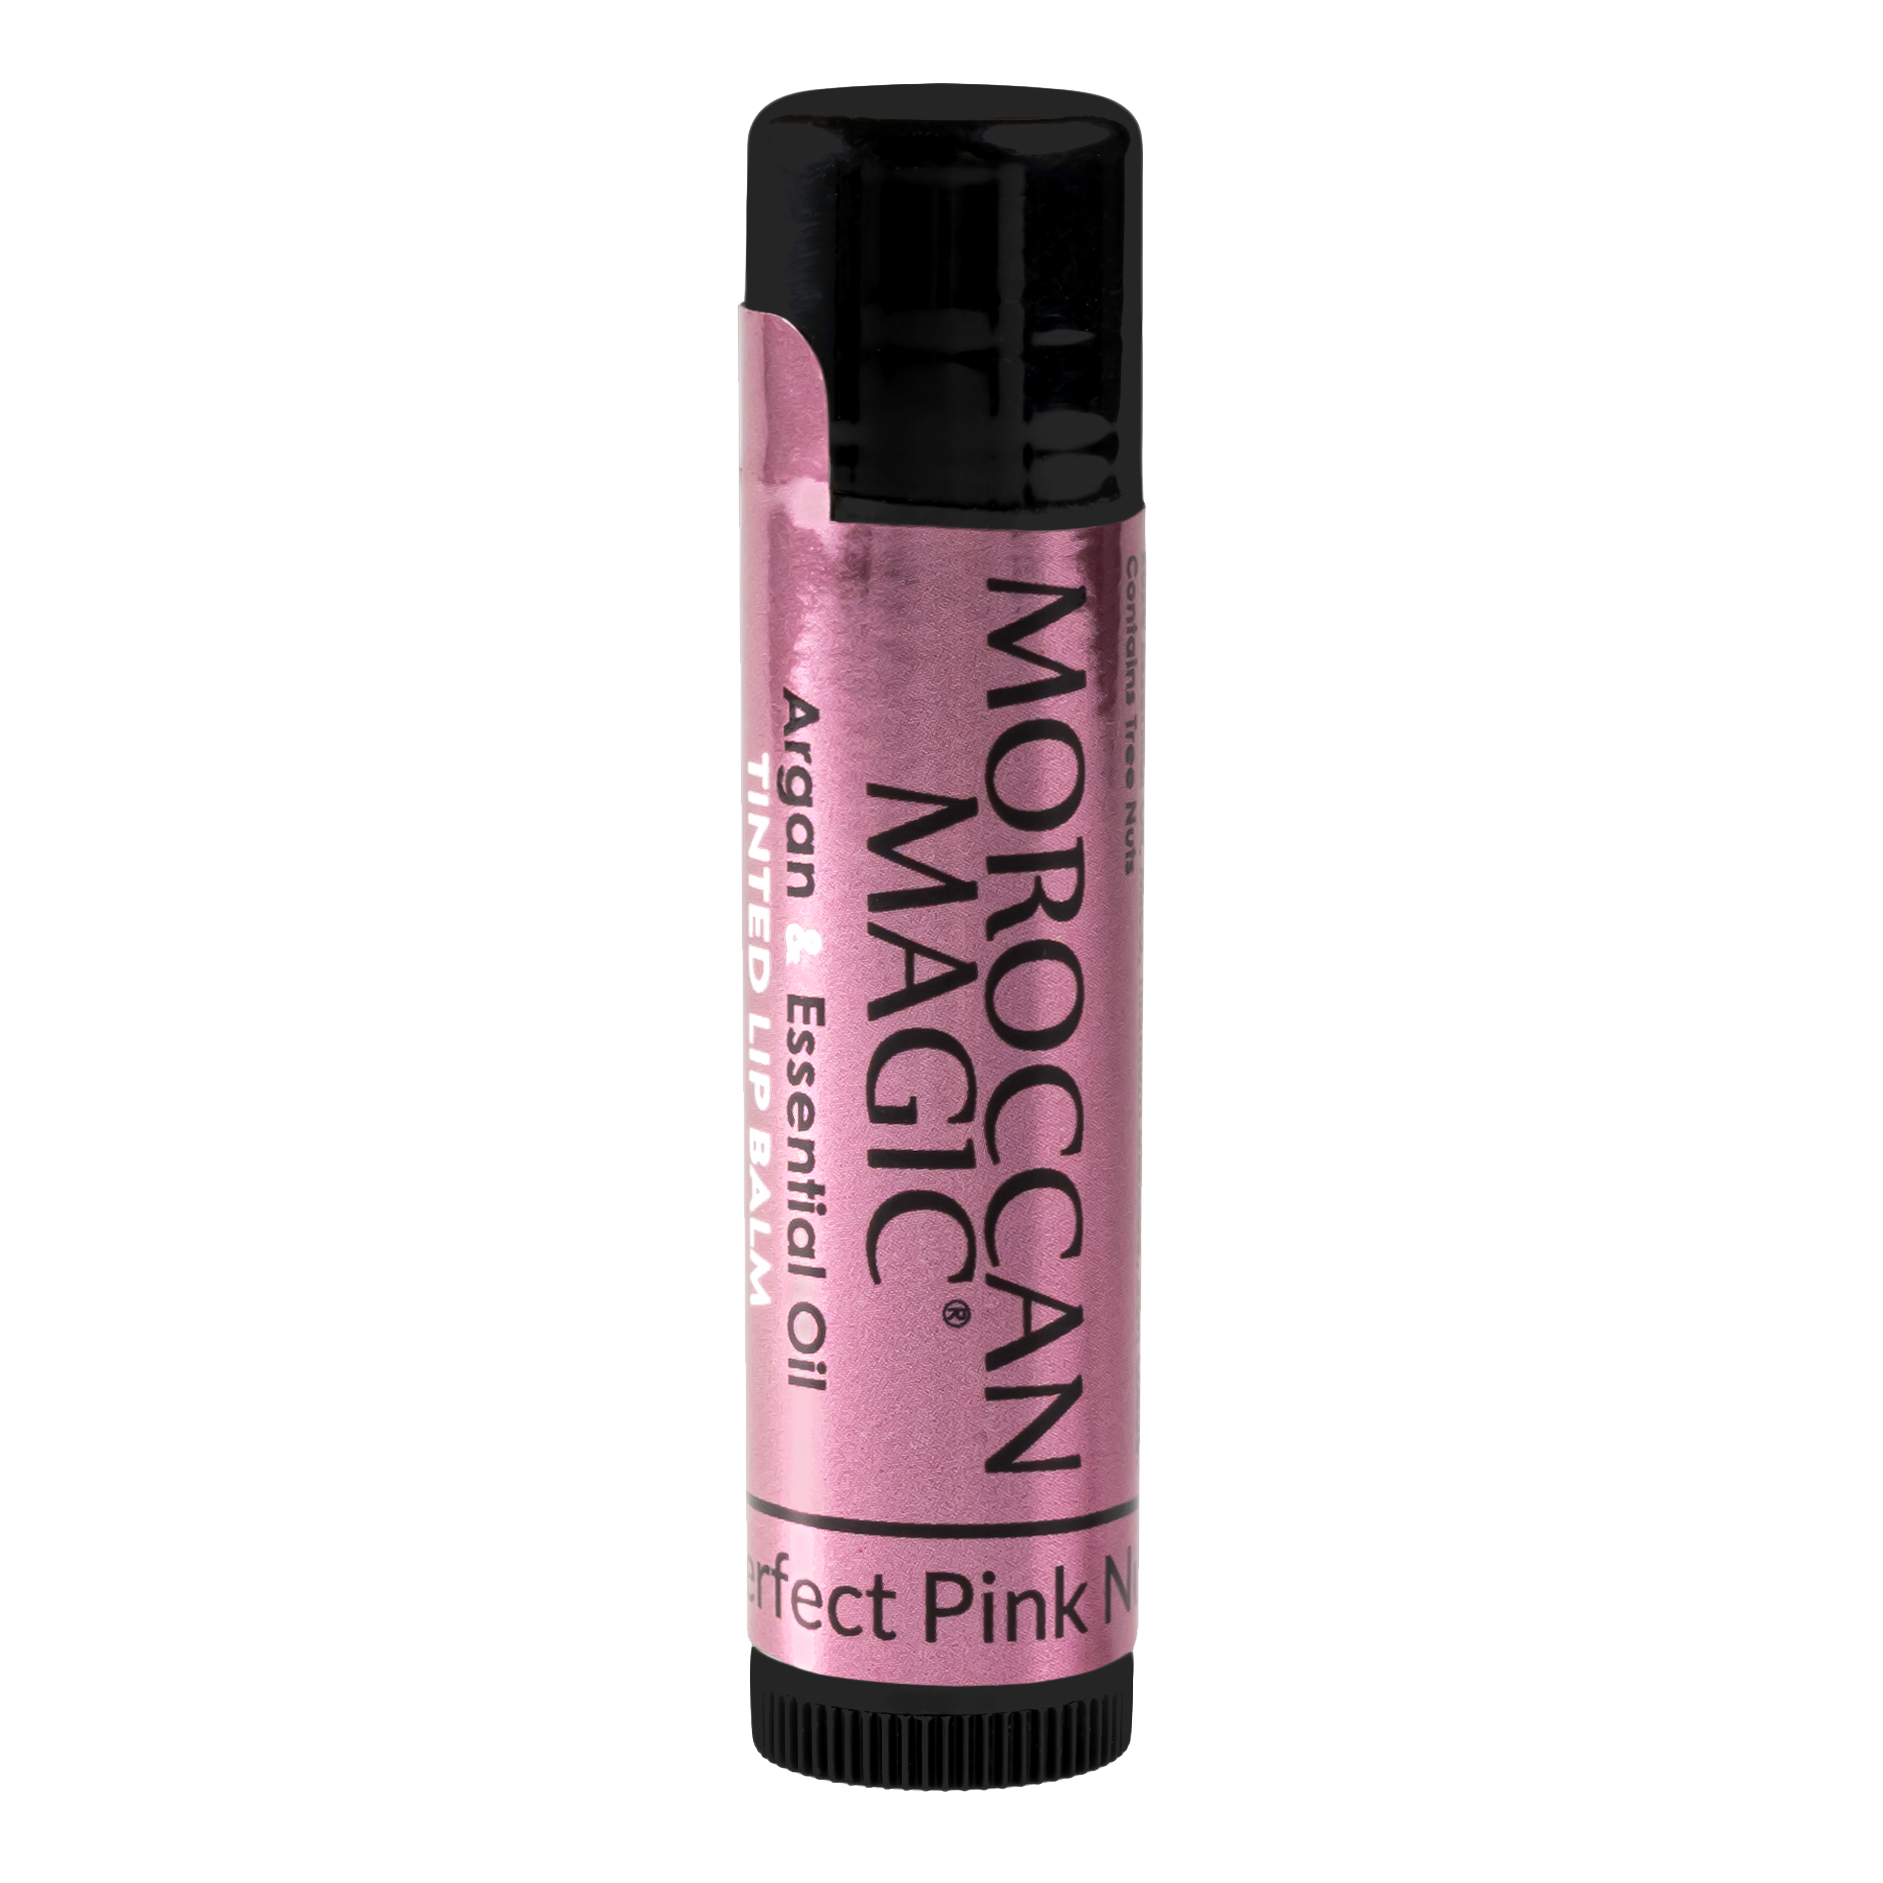 PERFECT PINK NUDE LIP TINT (12 PIECES) – Moroccan Magic